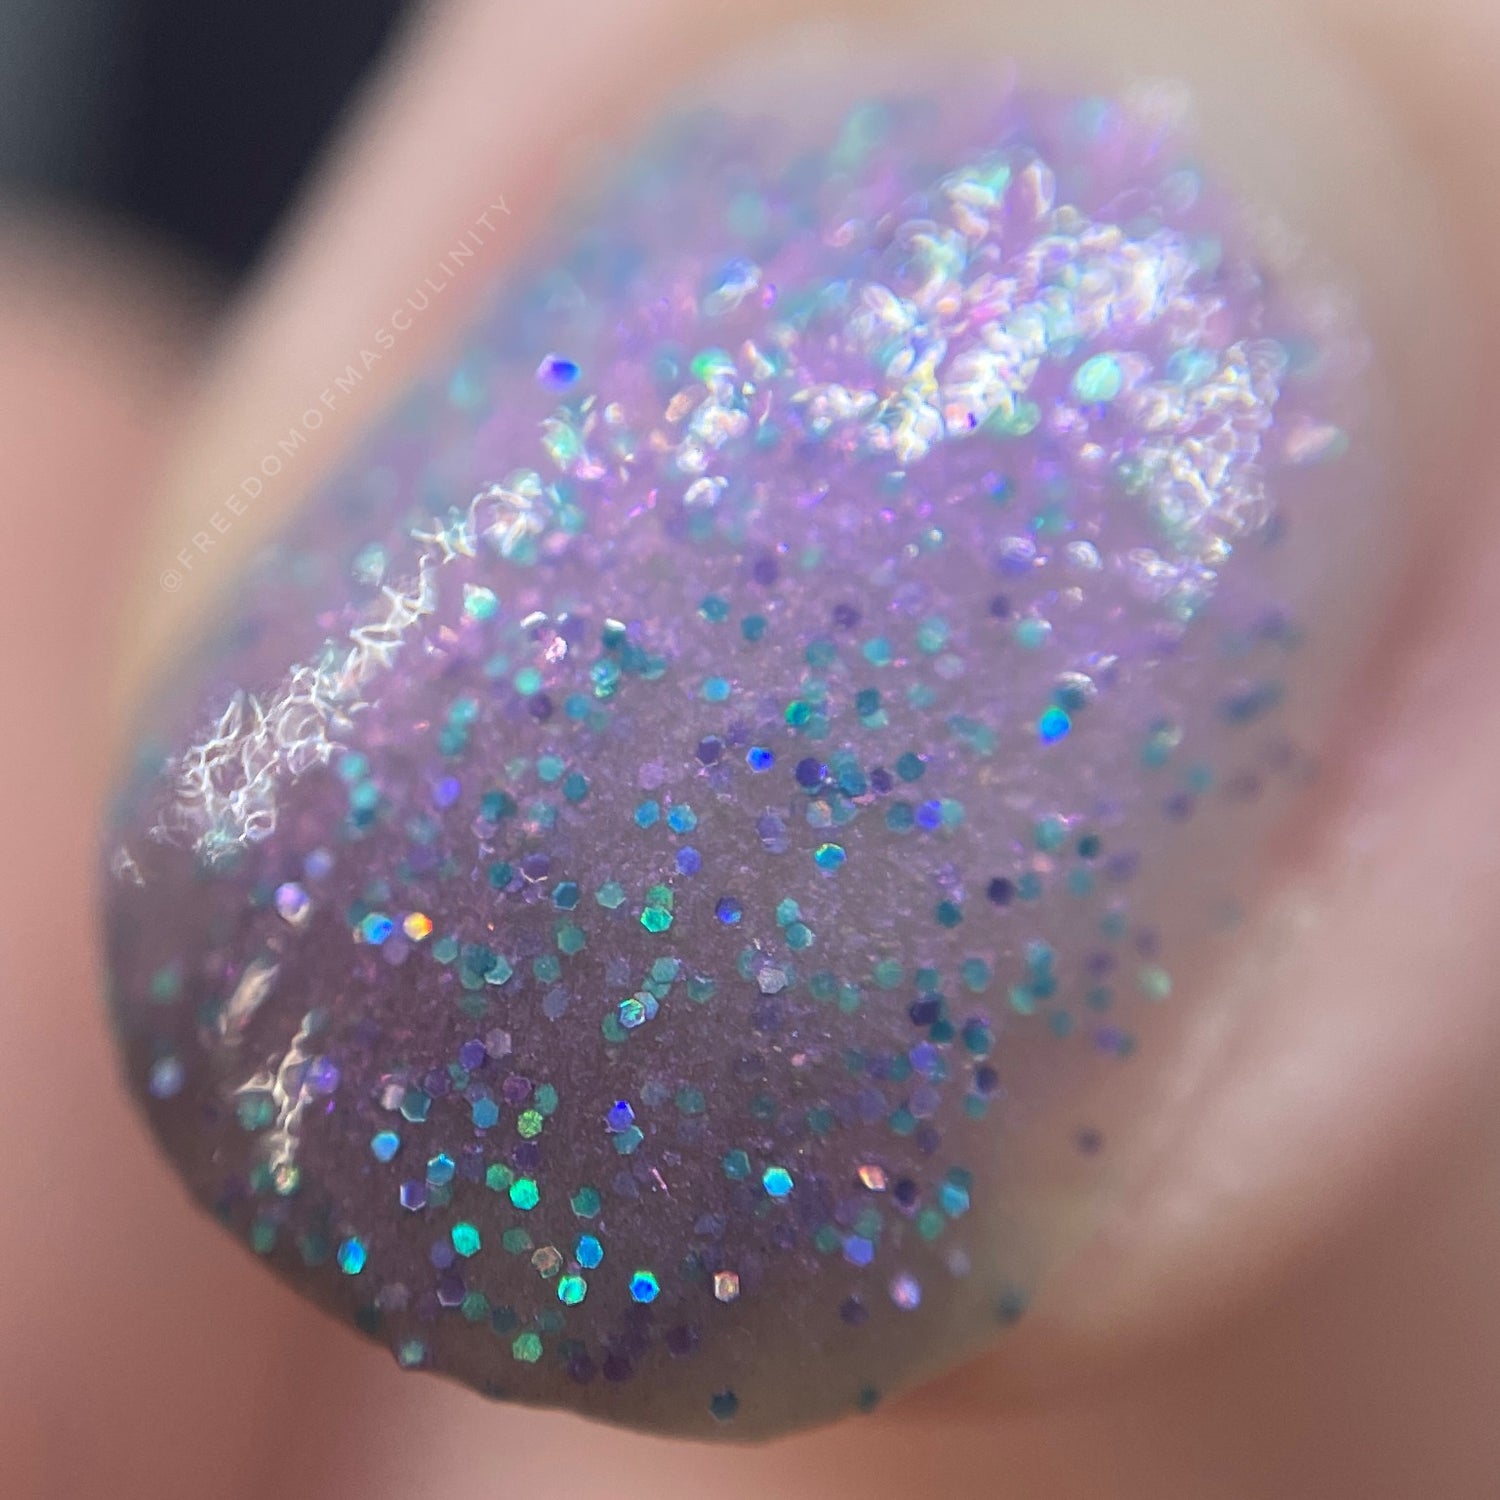 warmer short nails show off holographic flakes on a purple base duotone